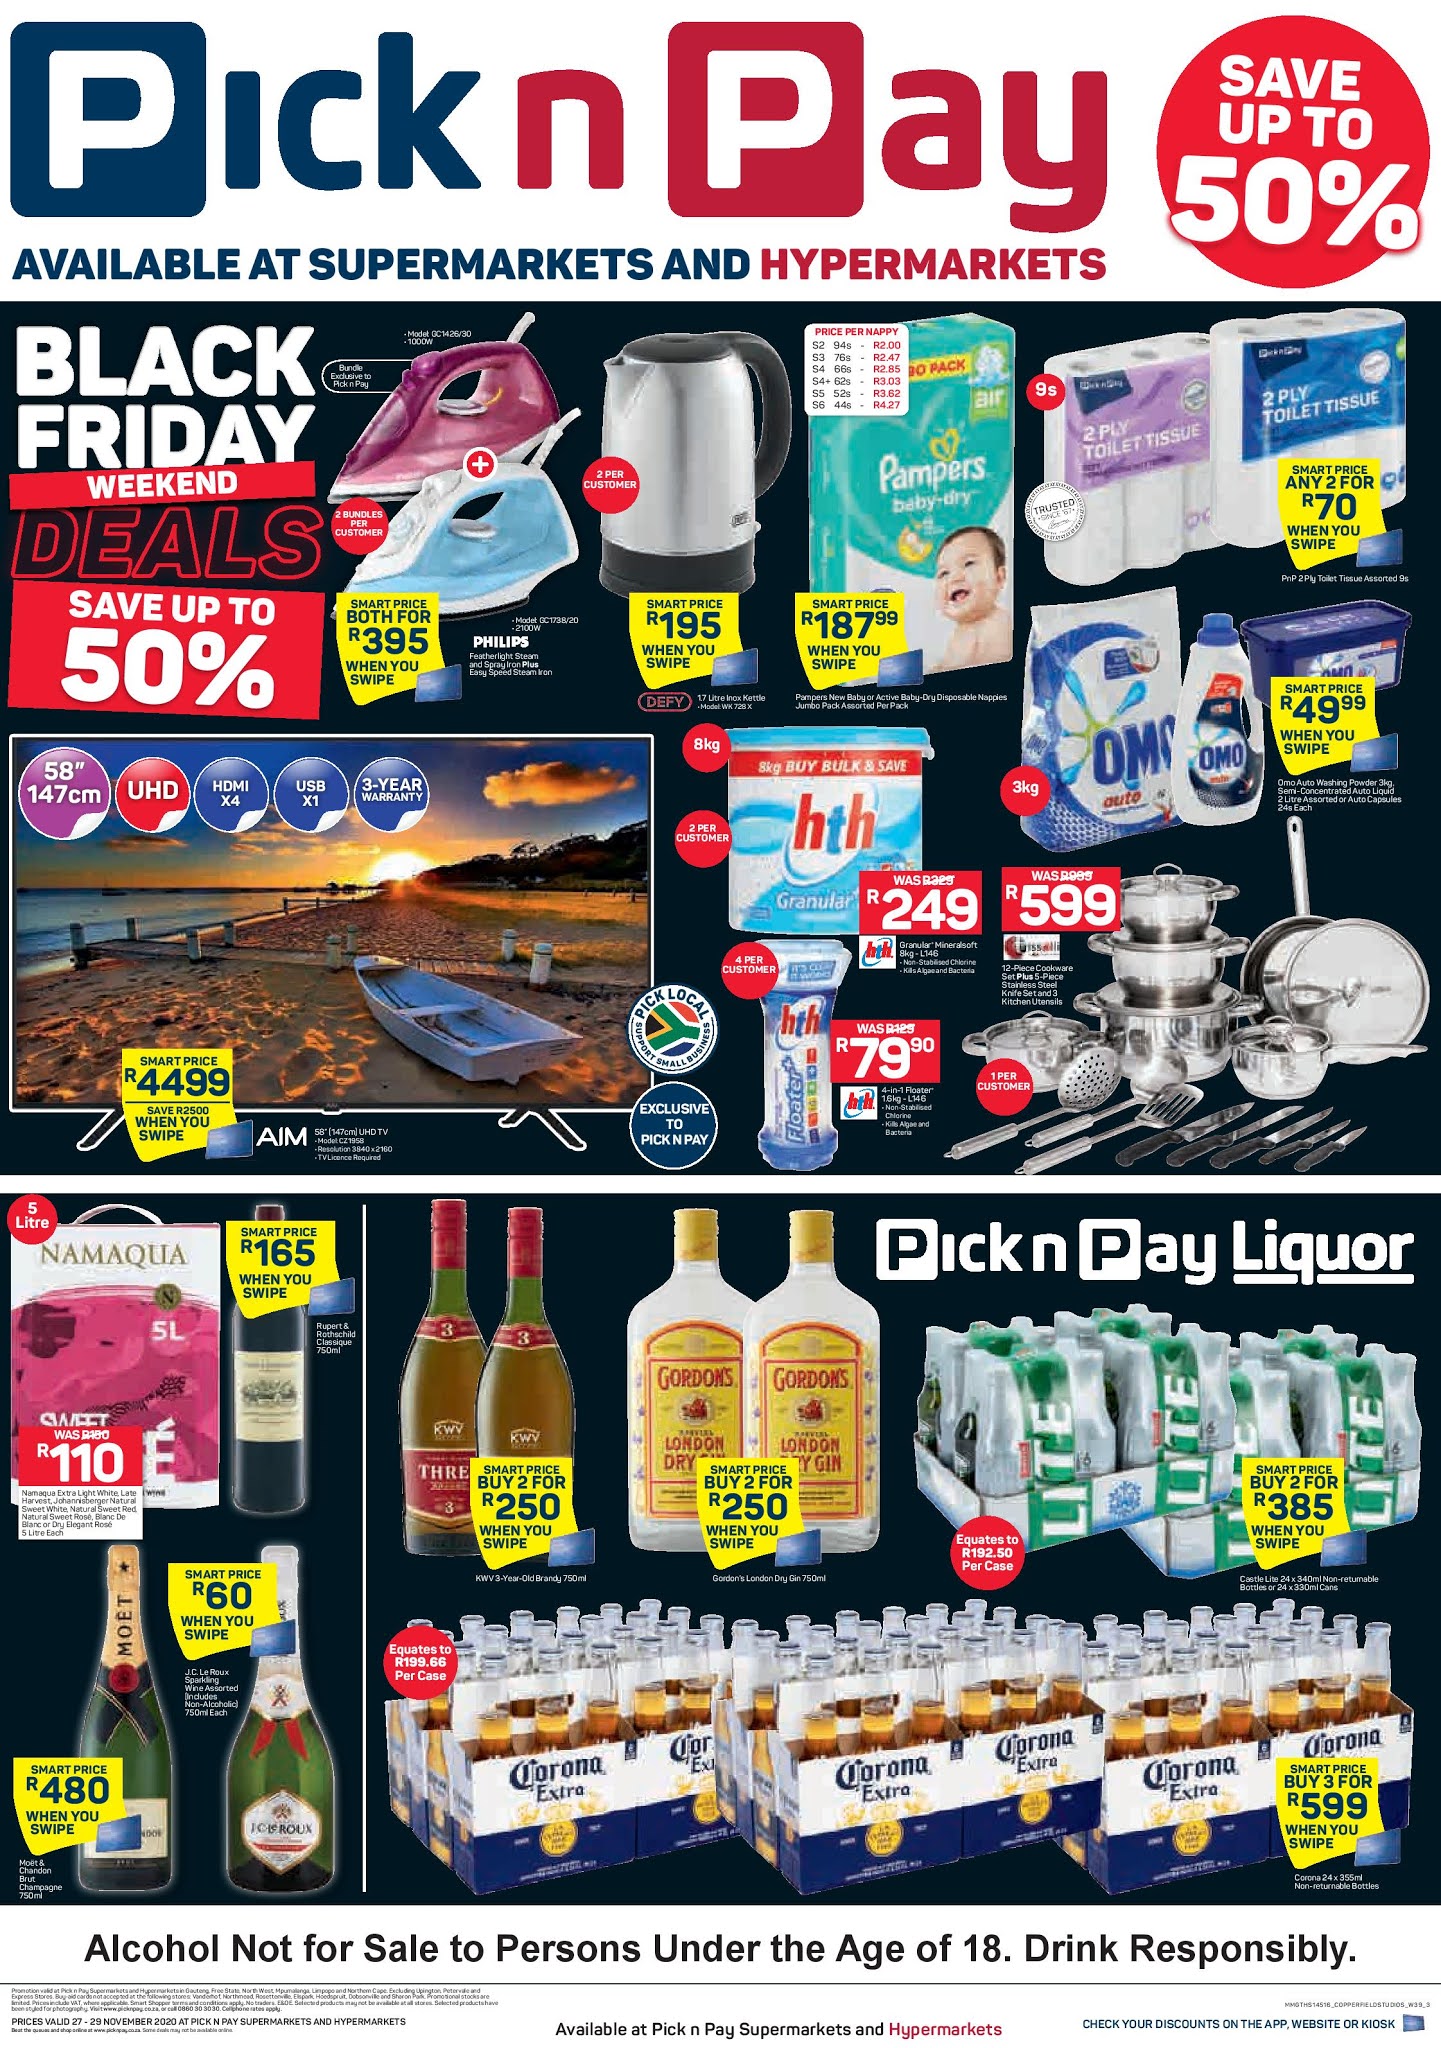 [Updated 2020 ] Pick n Pay Black Friday Deals- INLAND - What Are The Black Friday Deals Today